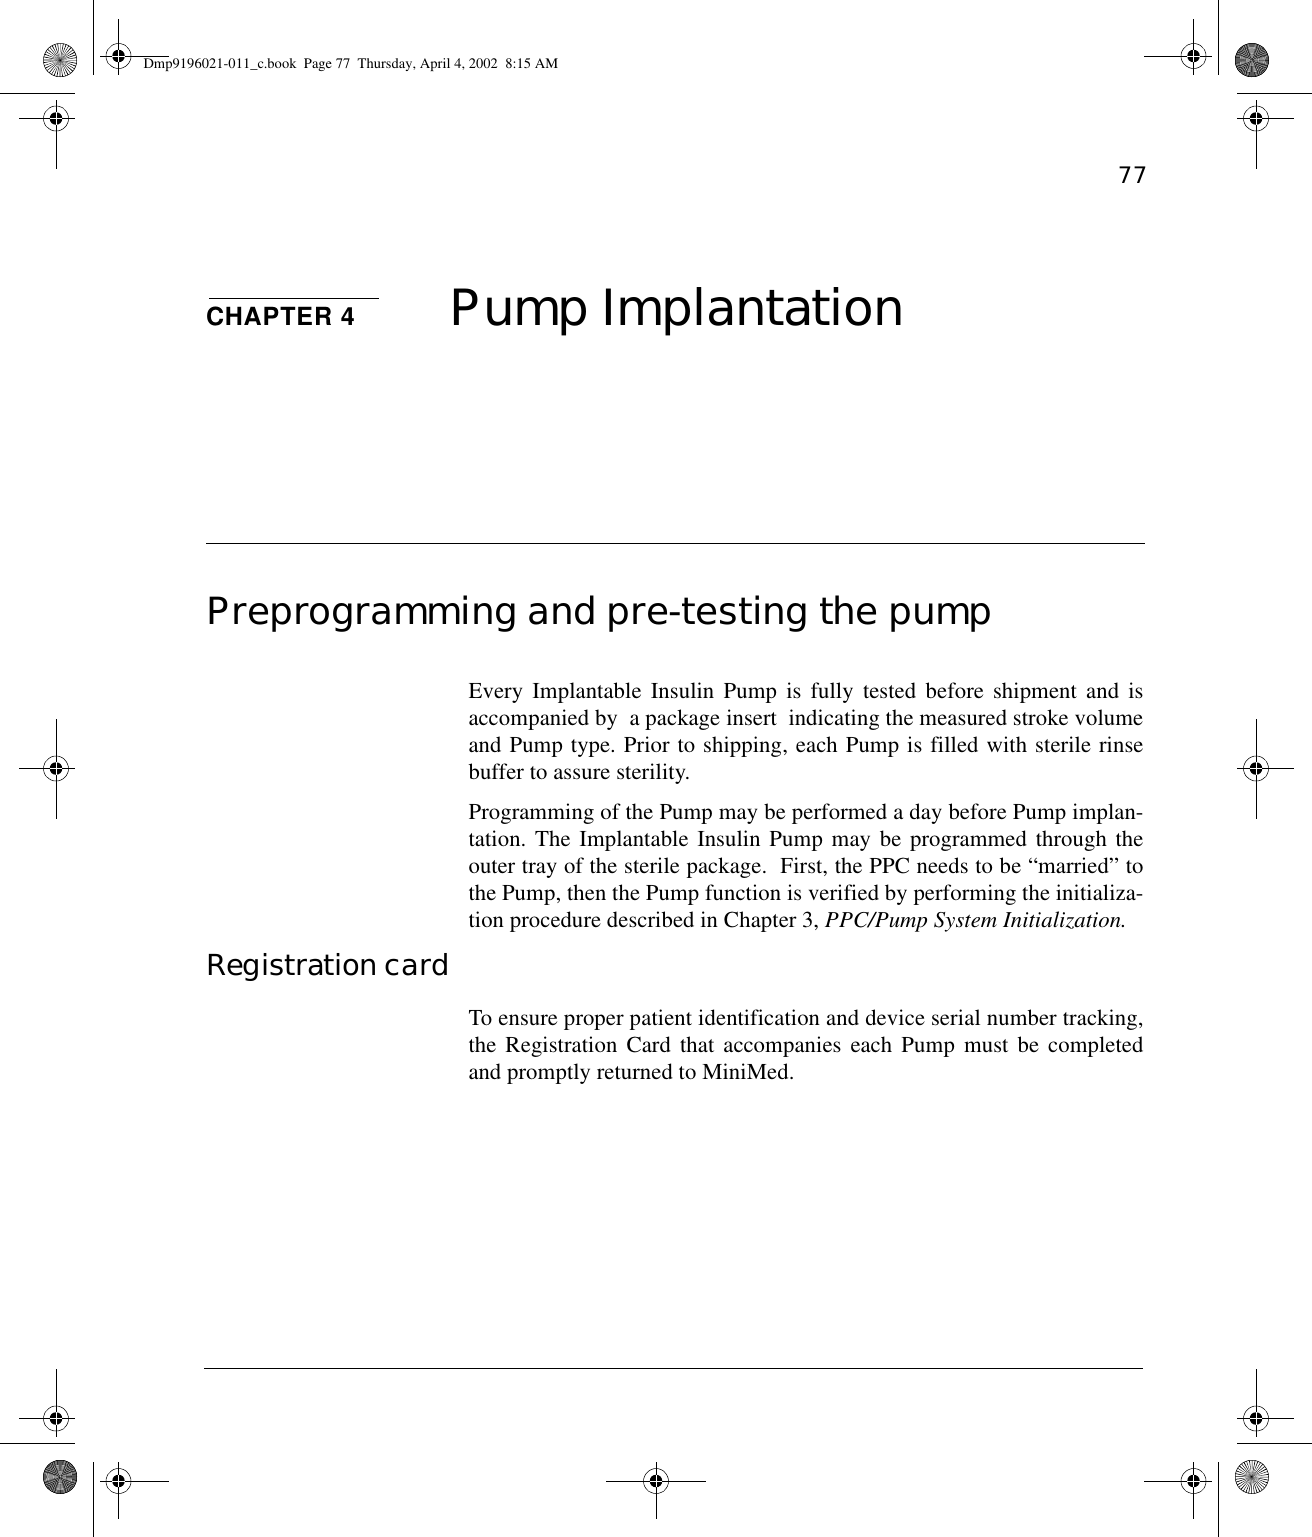 77CHAPTER 4 Pump ImplantationPreprogramming and pre-testing the pumpEvery Implantable Insulin Pump is fully tested before shipment and isaccompanied by  a package insert  indicating the measured stroke volumeand Pump type. Prior to shipping, each Pump is filled with sterile rinsebuffer to assure sterility.  Programming of the Pump may be performed a day before Pump implan-tation. The Implantable Insulin Pump may be programmed through theouter tray of the sterile package.  First, the PPC needs to be “married” tothe Pump, then the Pump function is verified by performing the initializa-tion procedure described in Chapter 3, PPC/Pump System Initialization.Registration cardTo ensure proper patient identification and device serial number tracking,the Registration Card that accompanies each Pump must be completedand promptly returned to MiniMed.Dmp9196021-011_c.book  Page 77  Thursday, April 4, 2002  8:15 AM